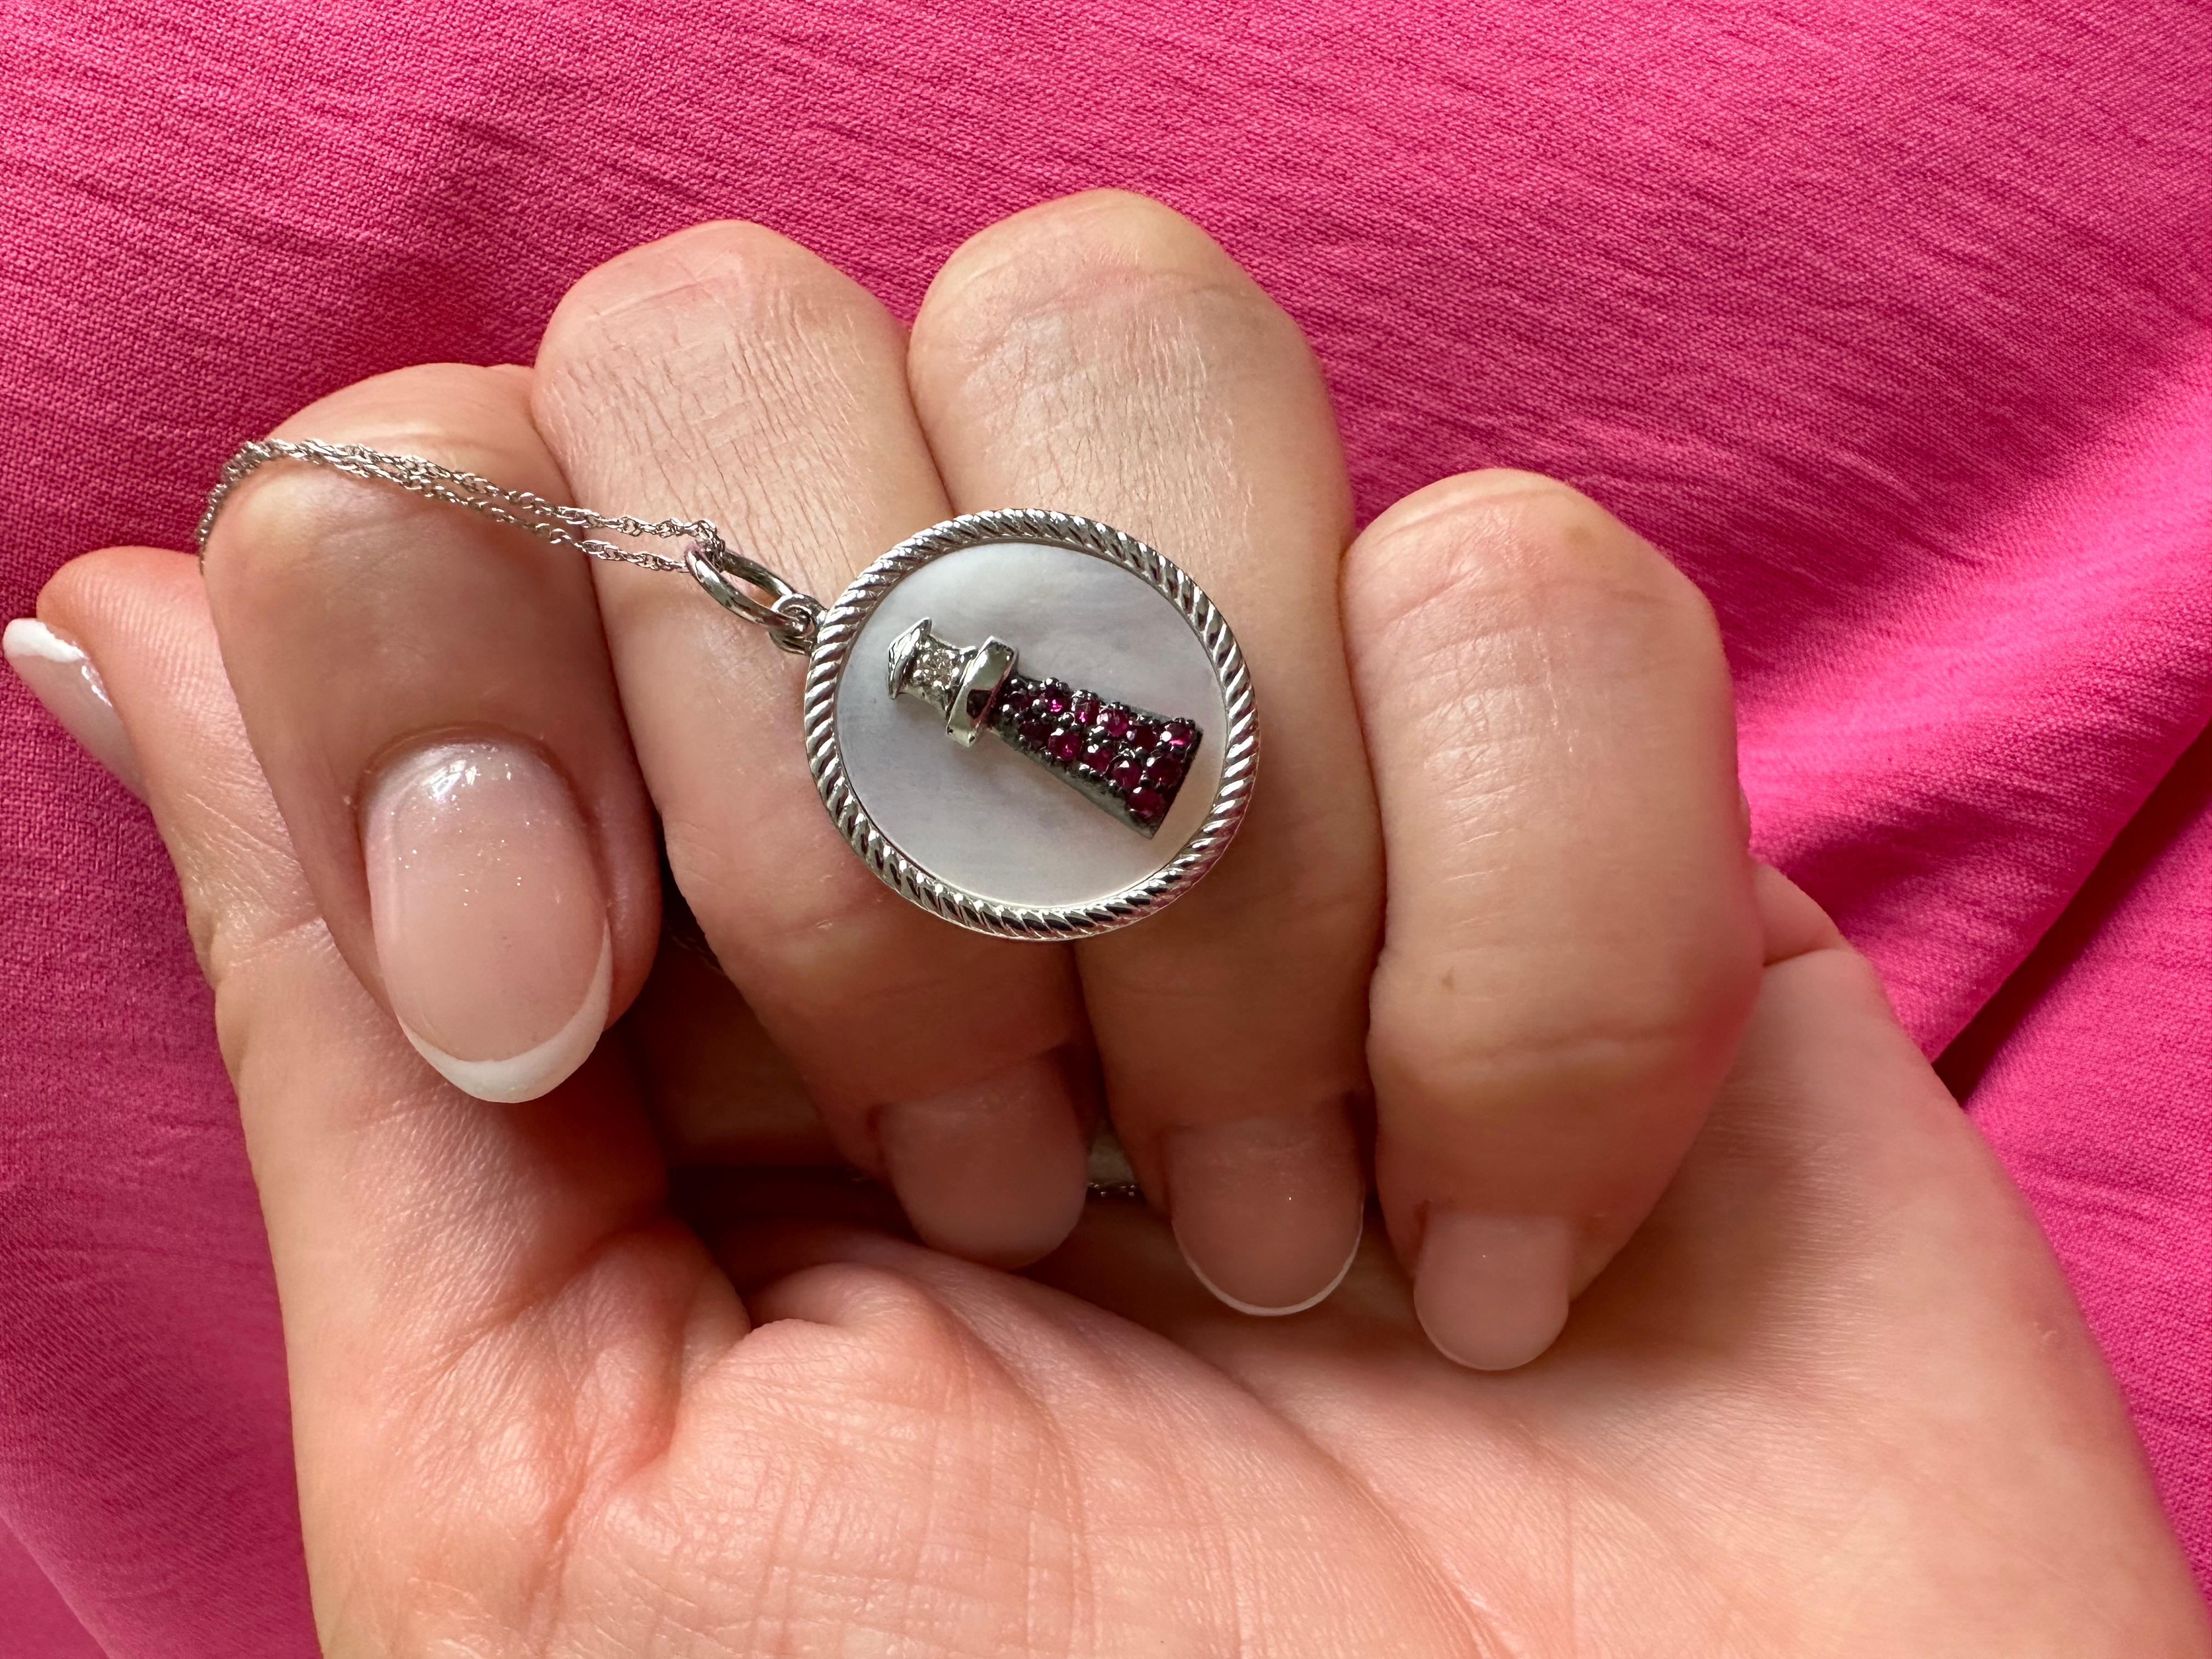 Stunning Lighthouse made with mother of pearl, diamonds and rubies!

METAL: 14KT
NATURAL DIAMOND(S)
Clarity/Color: VS/F-G
Cut: Round Brilliant
NATURAL RUBY(S)
Clarity/Color: VS/F-G
Cut: Round
Grams:7 (chain included)


WHAT YOU GET AT STAMPAR